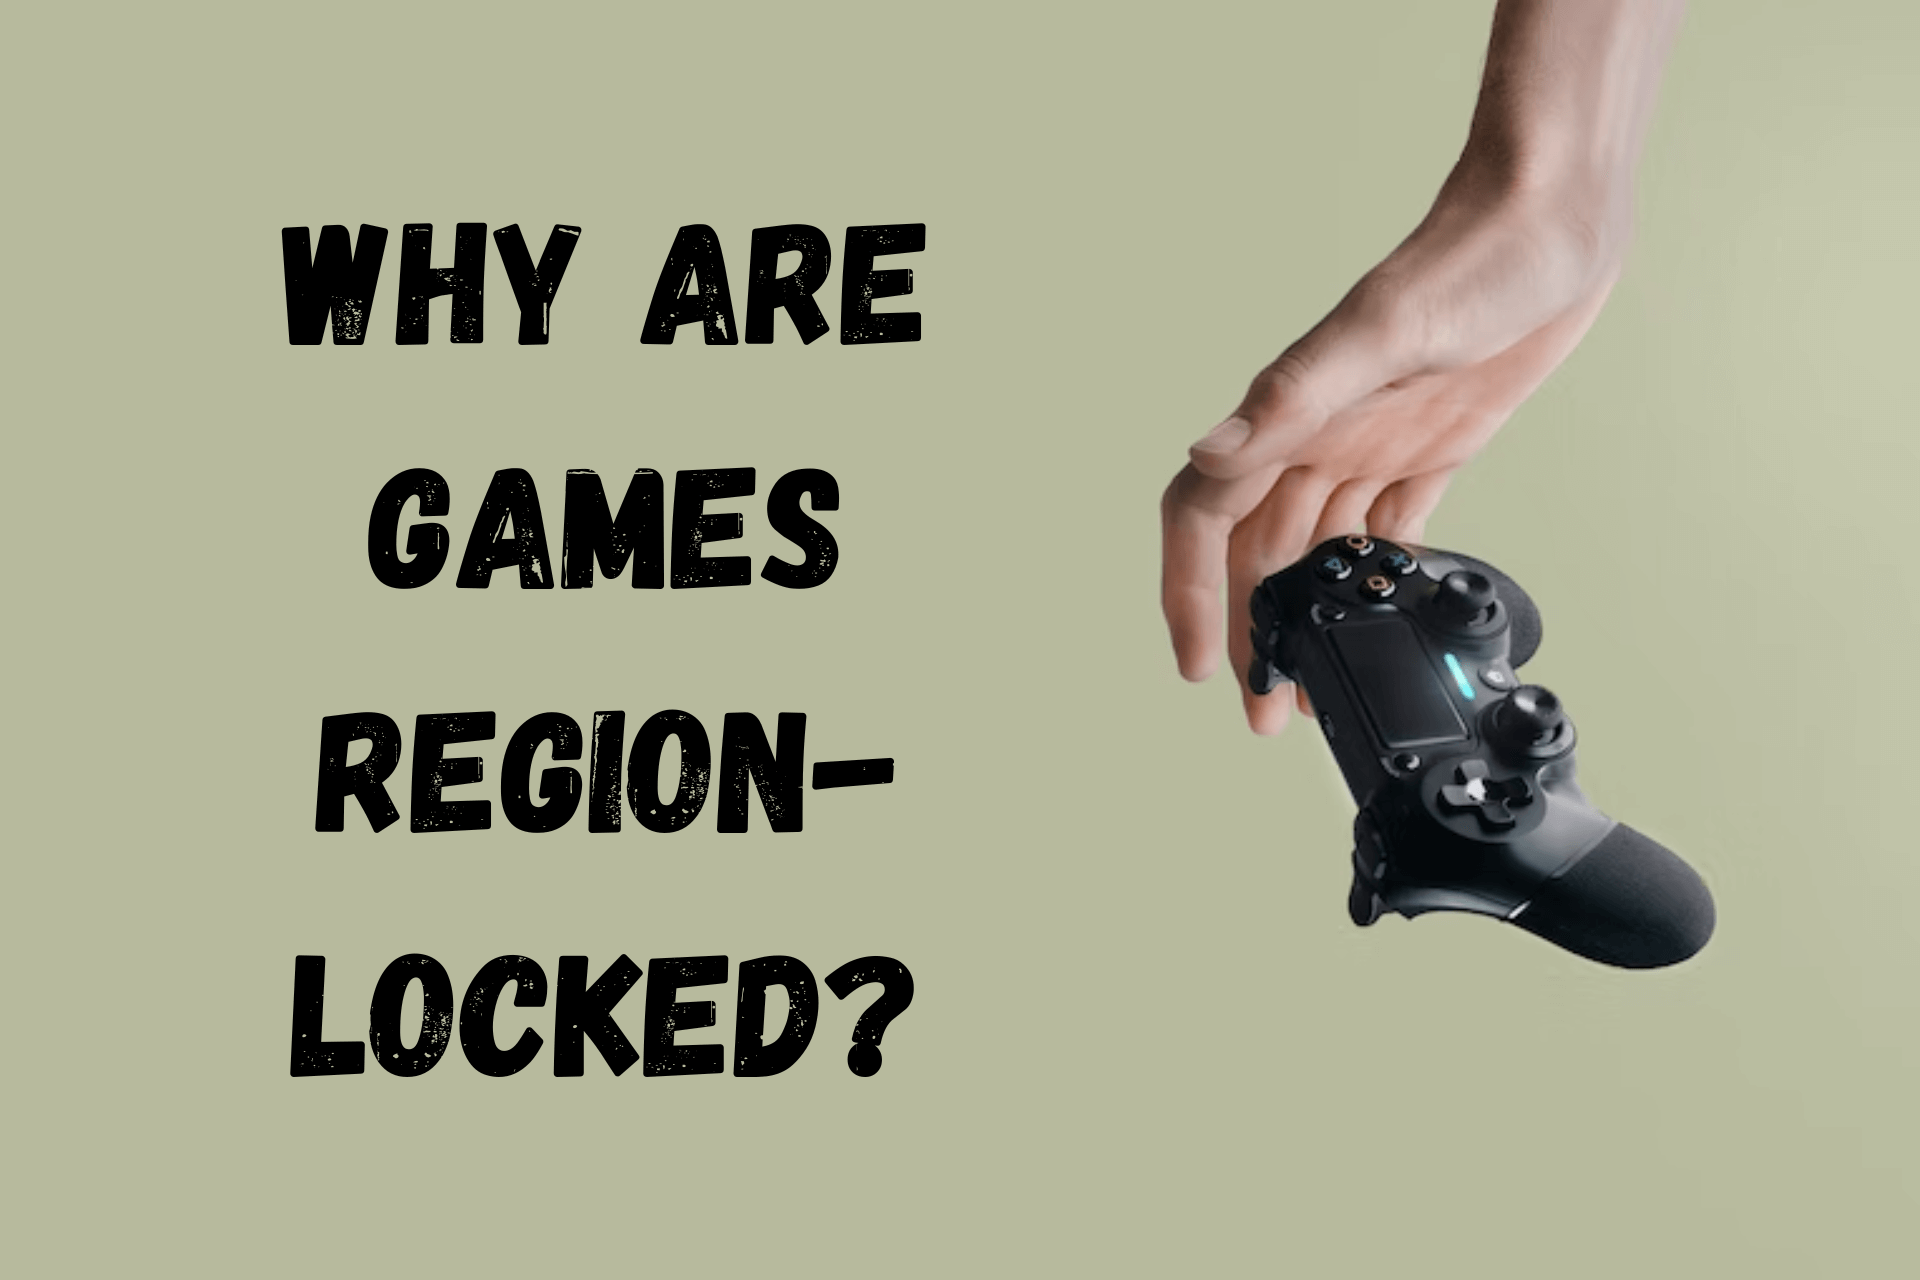 Why are games region-locked